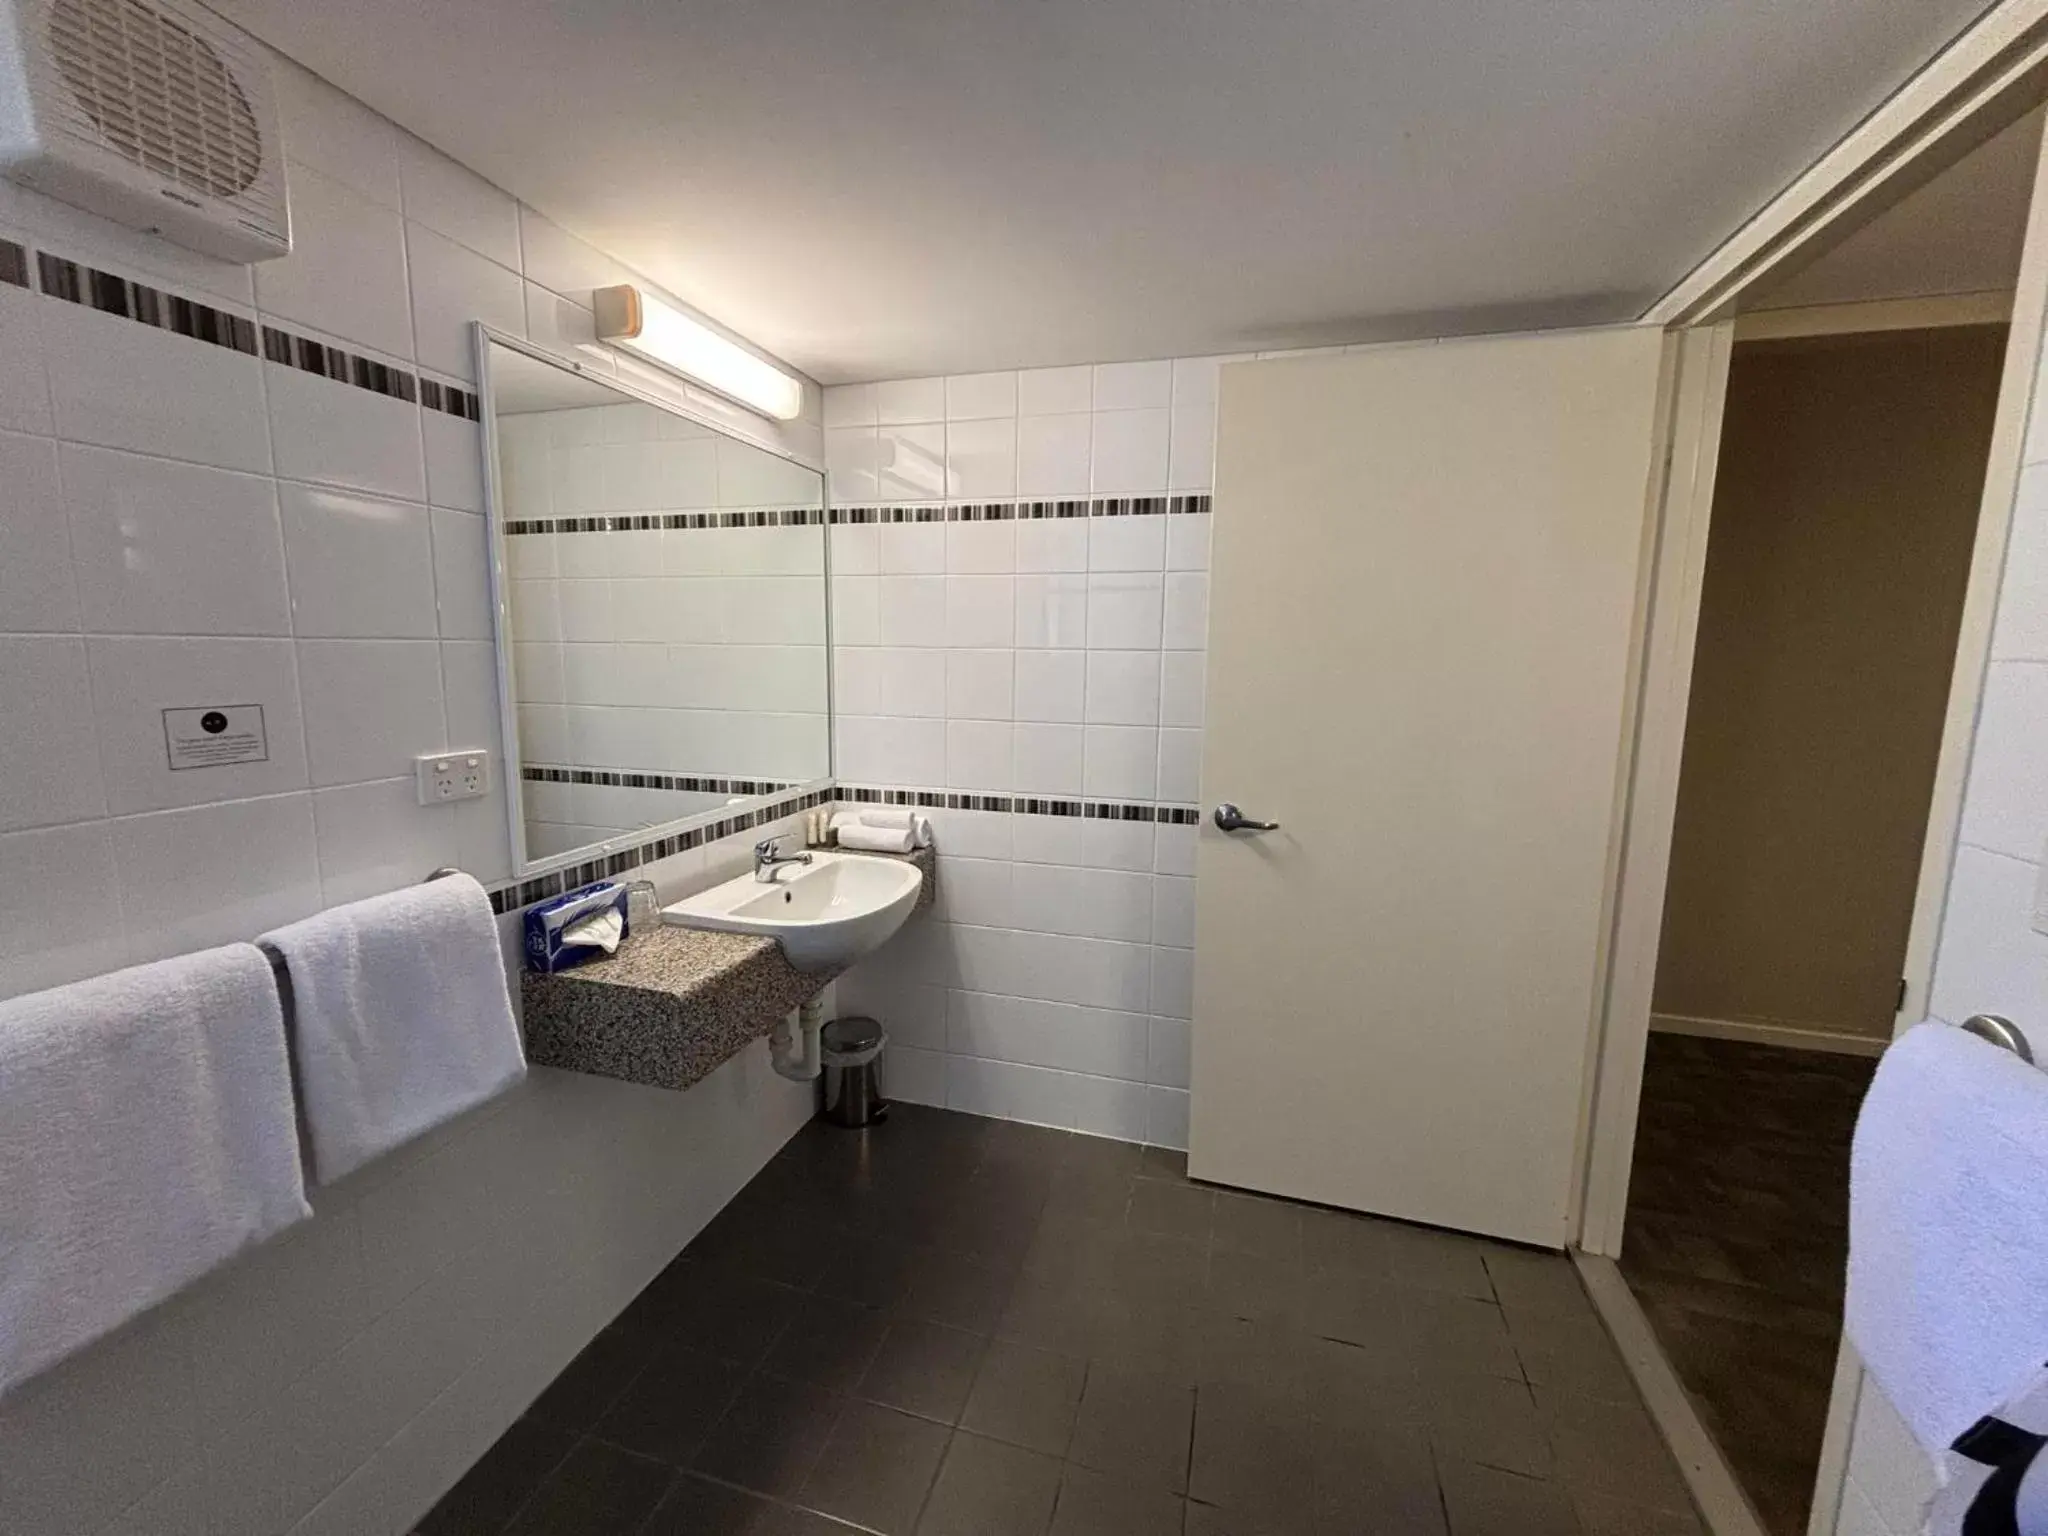 Facility for disabled guests, Bathroom in Geraldton Motor Inn